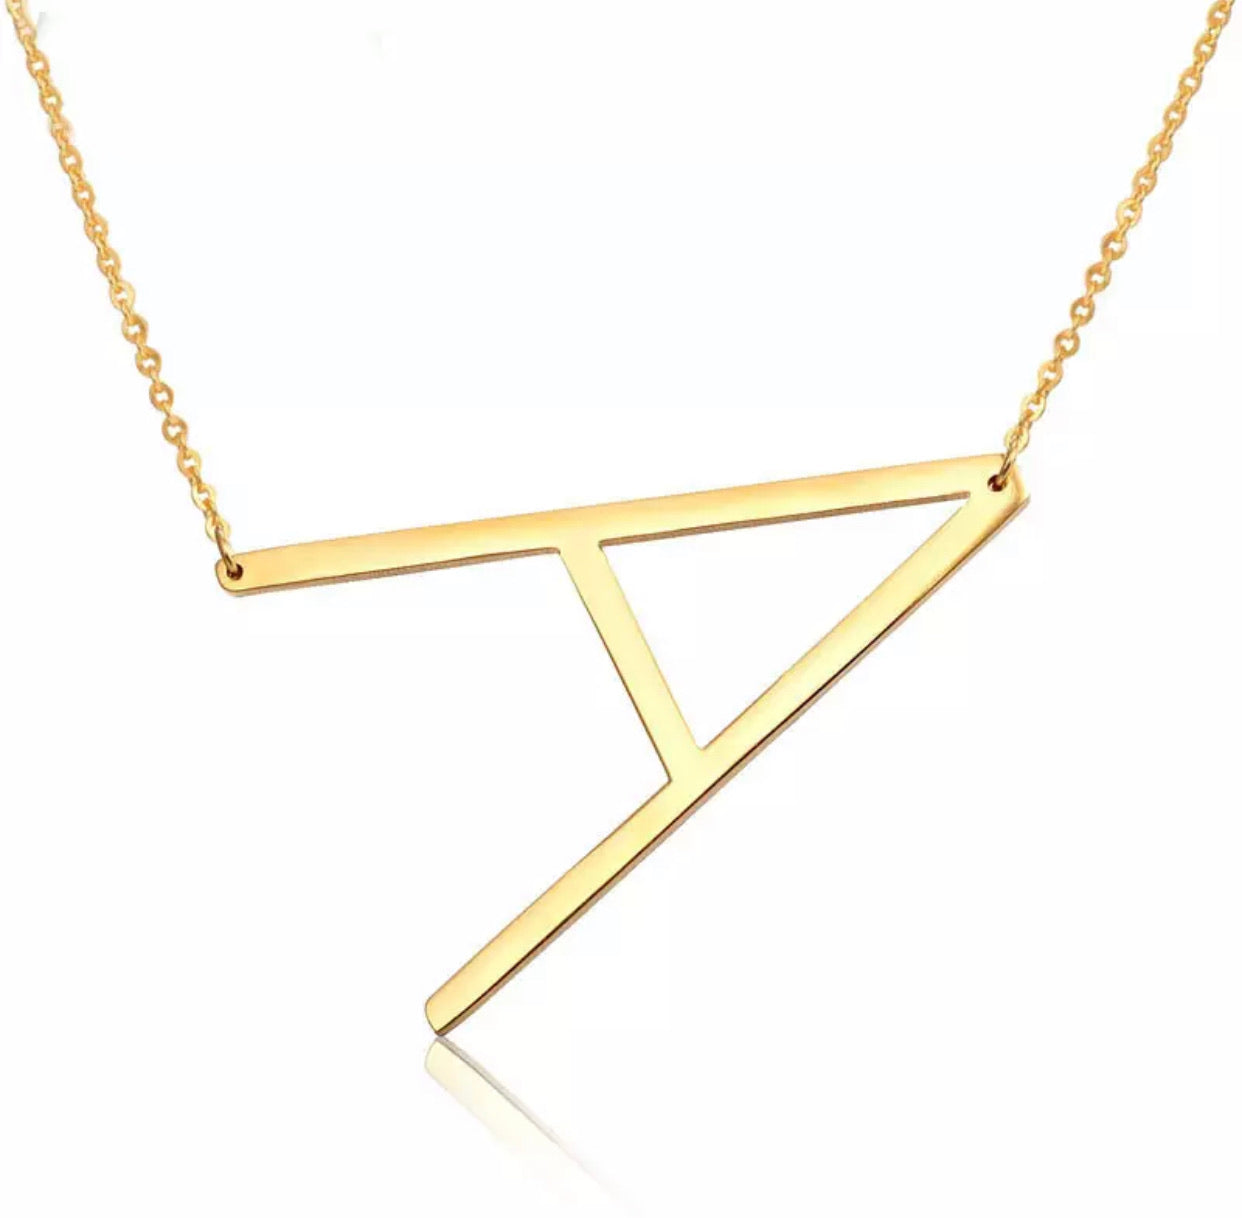 Women's Initial Necklace - Beauty of the Belle